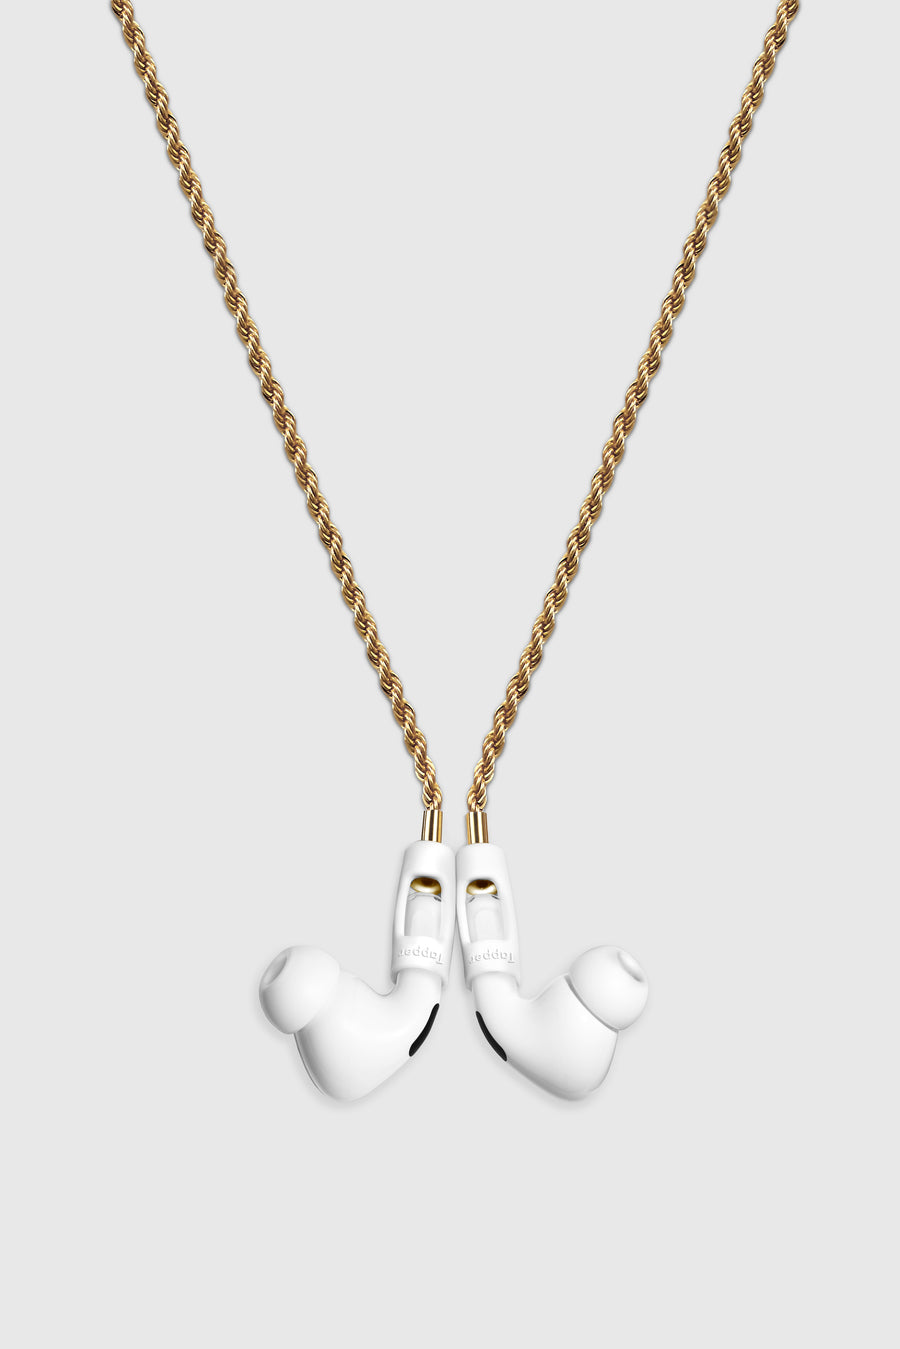 Tapper Gold Plated Rope Chain Necklace for Apple AirPods and AirPods Pro (compatible with All Generations). Designed in Sweden.